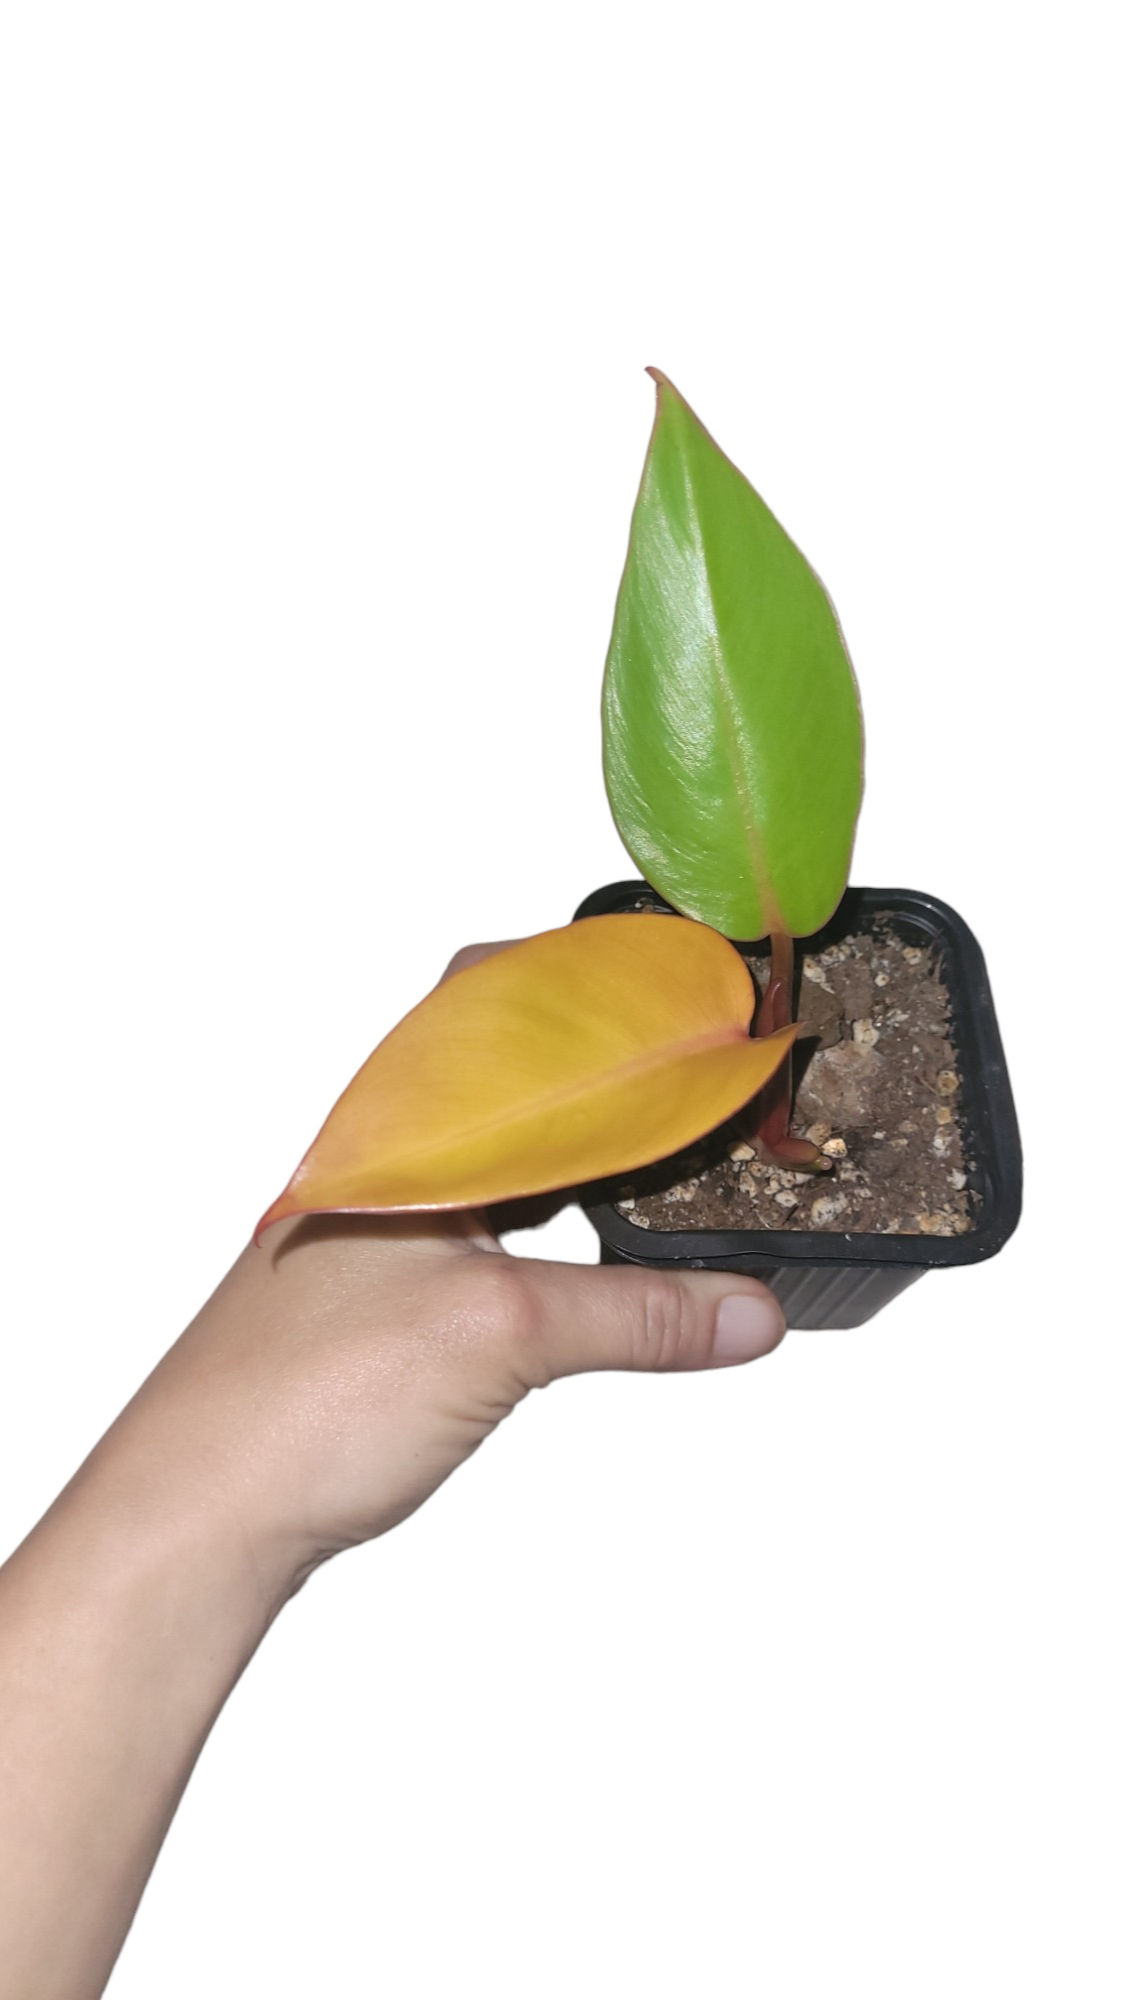 Philodendron sp